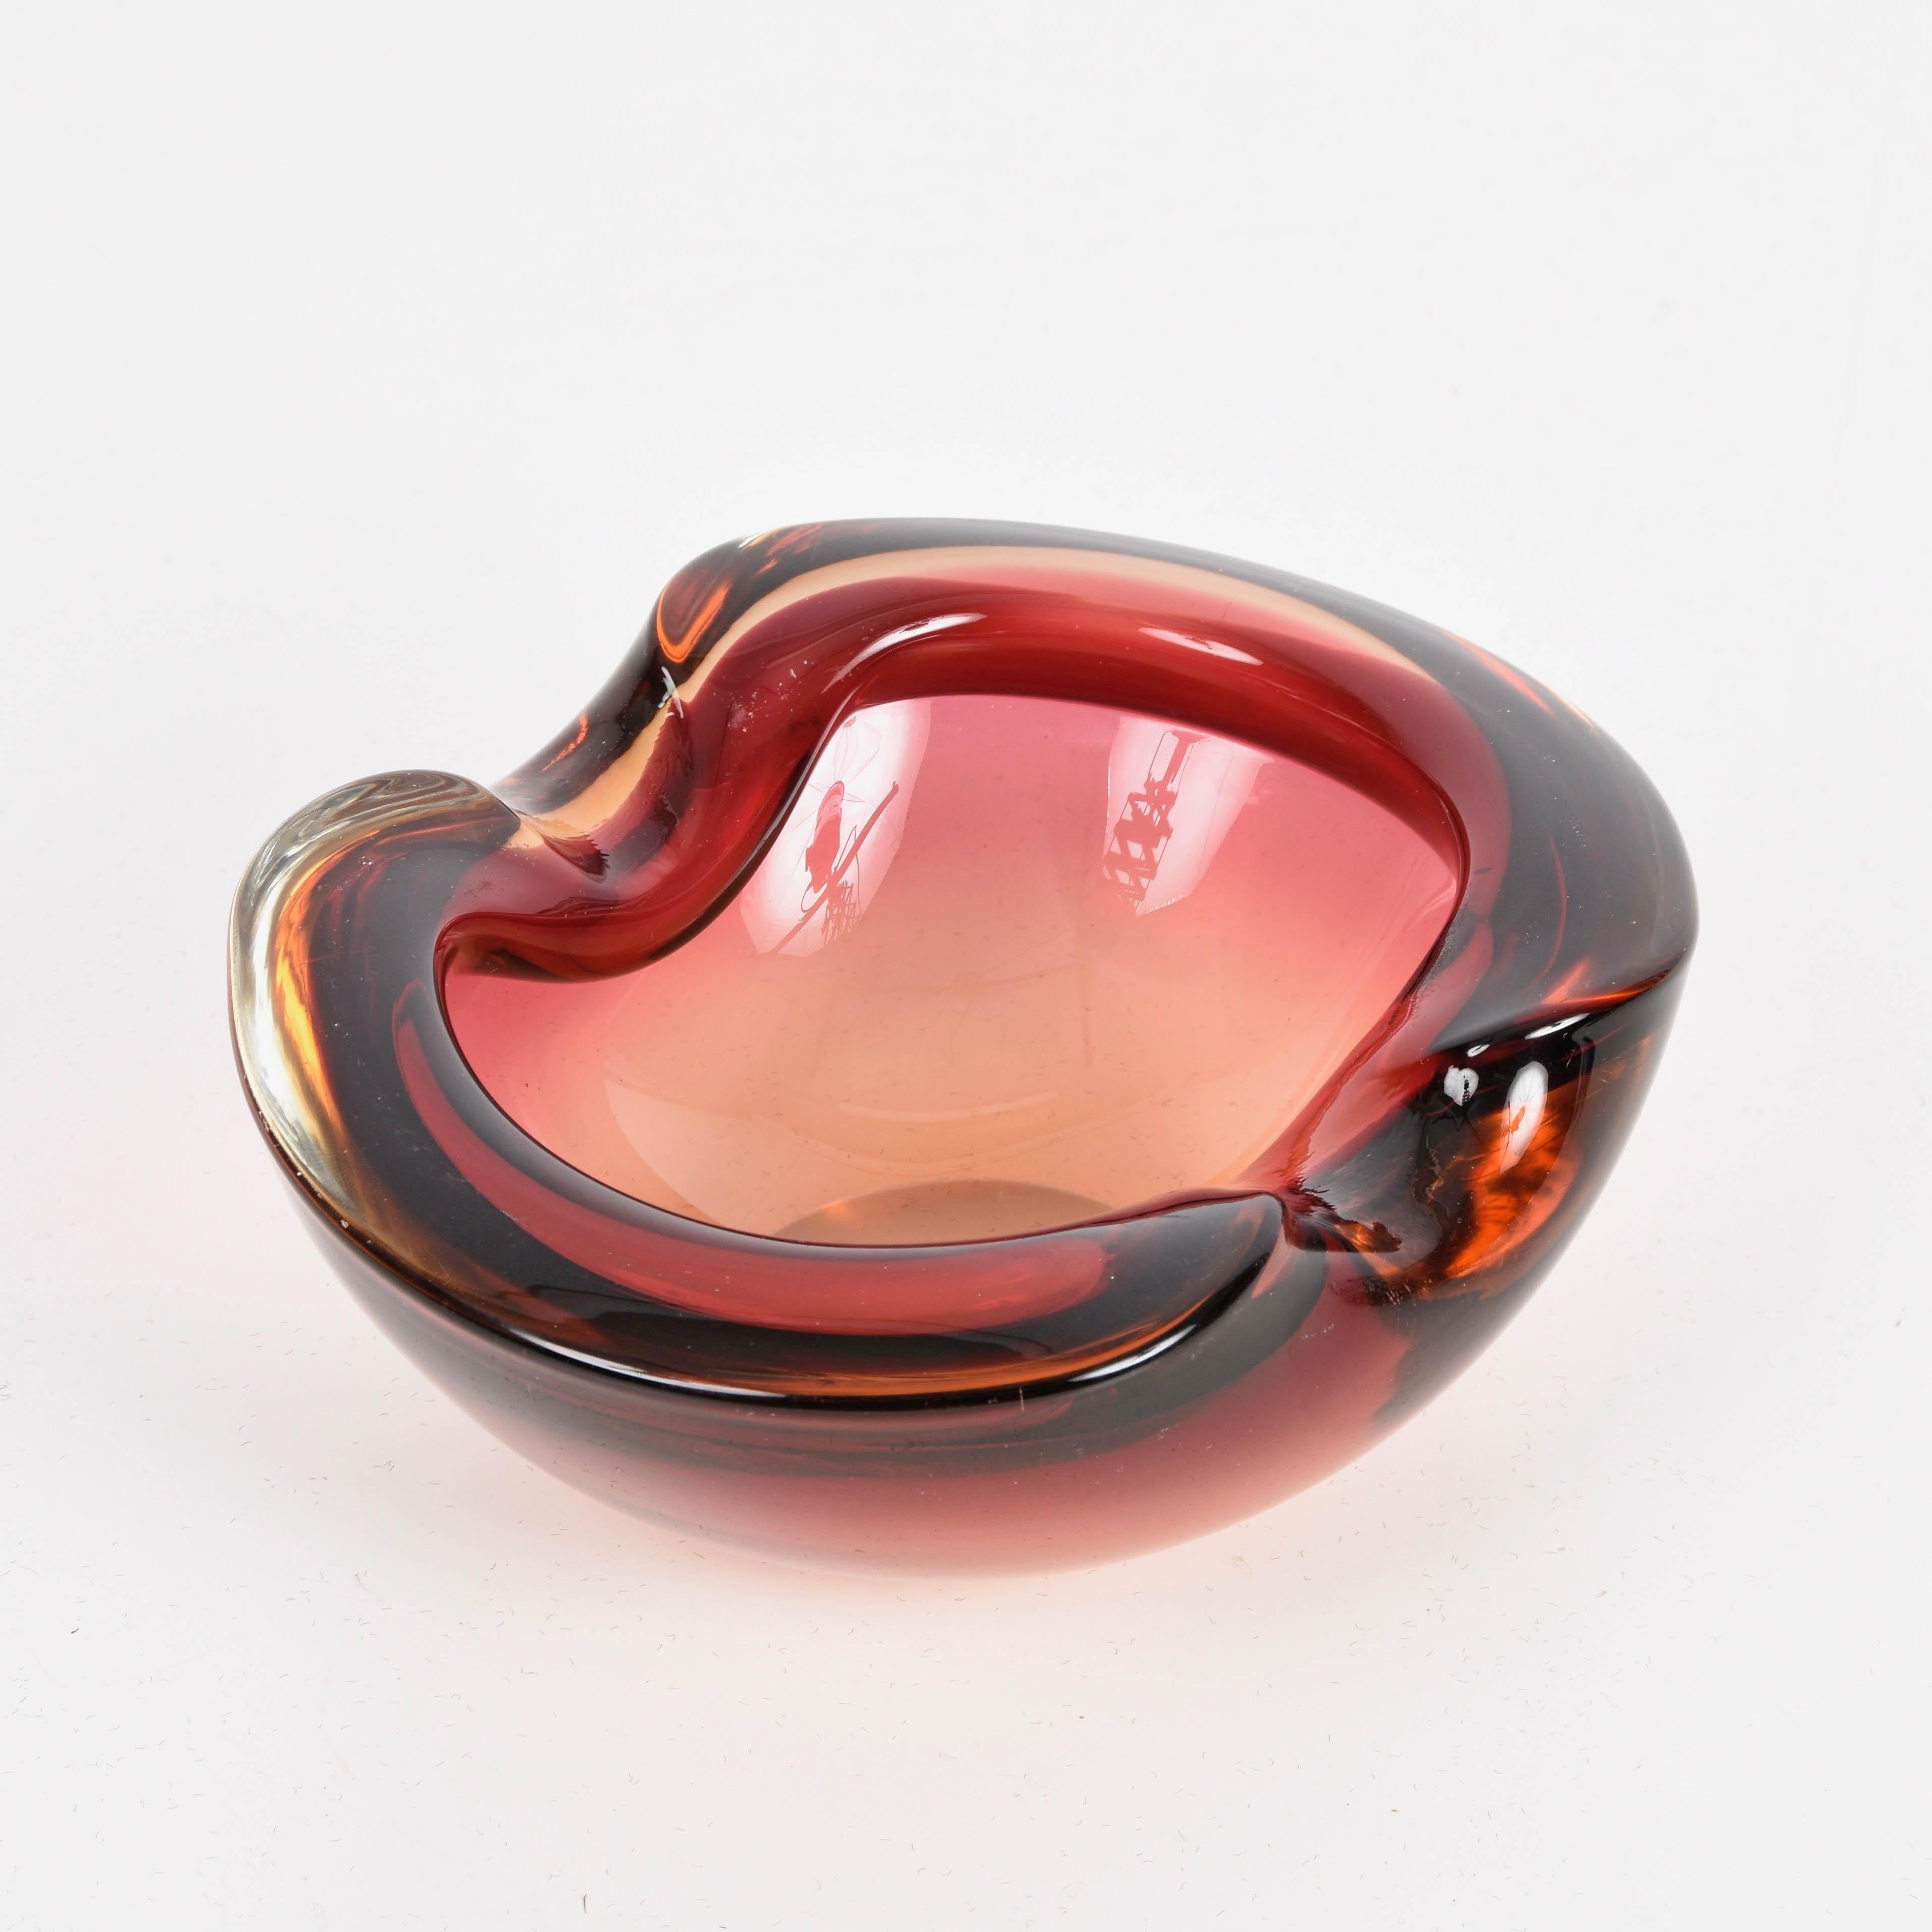 Magnificent heart-shaped ruby red and crystal Sommerso glass Murano glass bowl or ashtray. This amazing piece was produced in Italy during the 1960s.

This wonderful piece is a perfect blend of sinuous lines and colors of the Murano glass due to